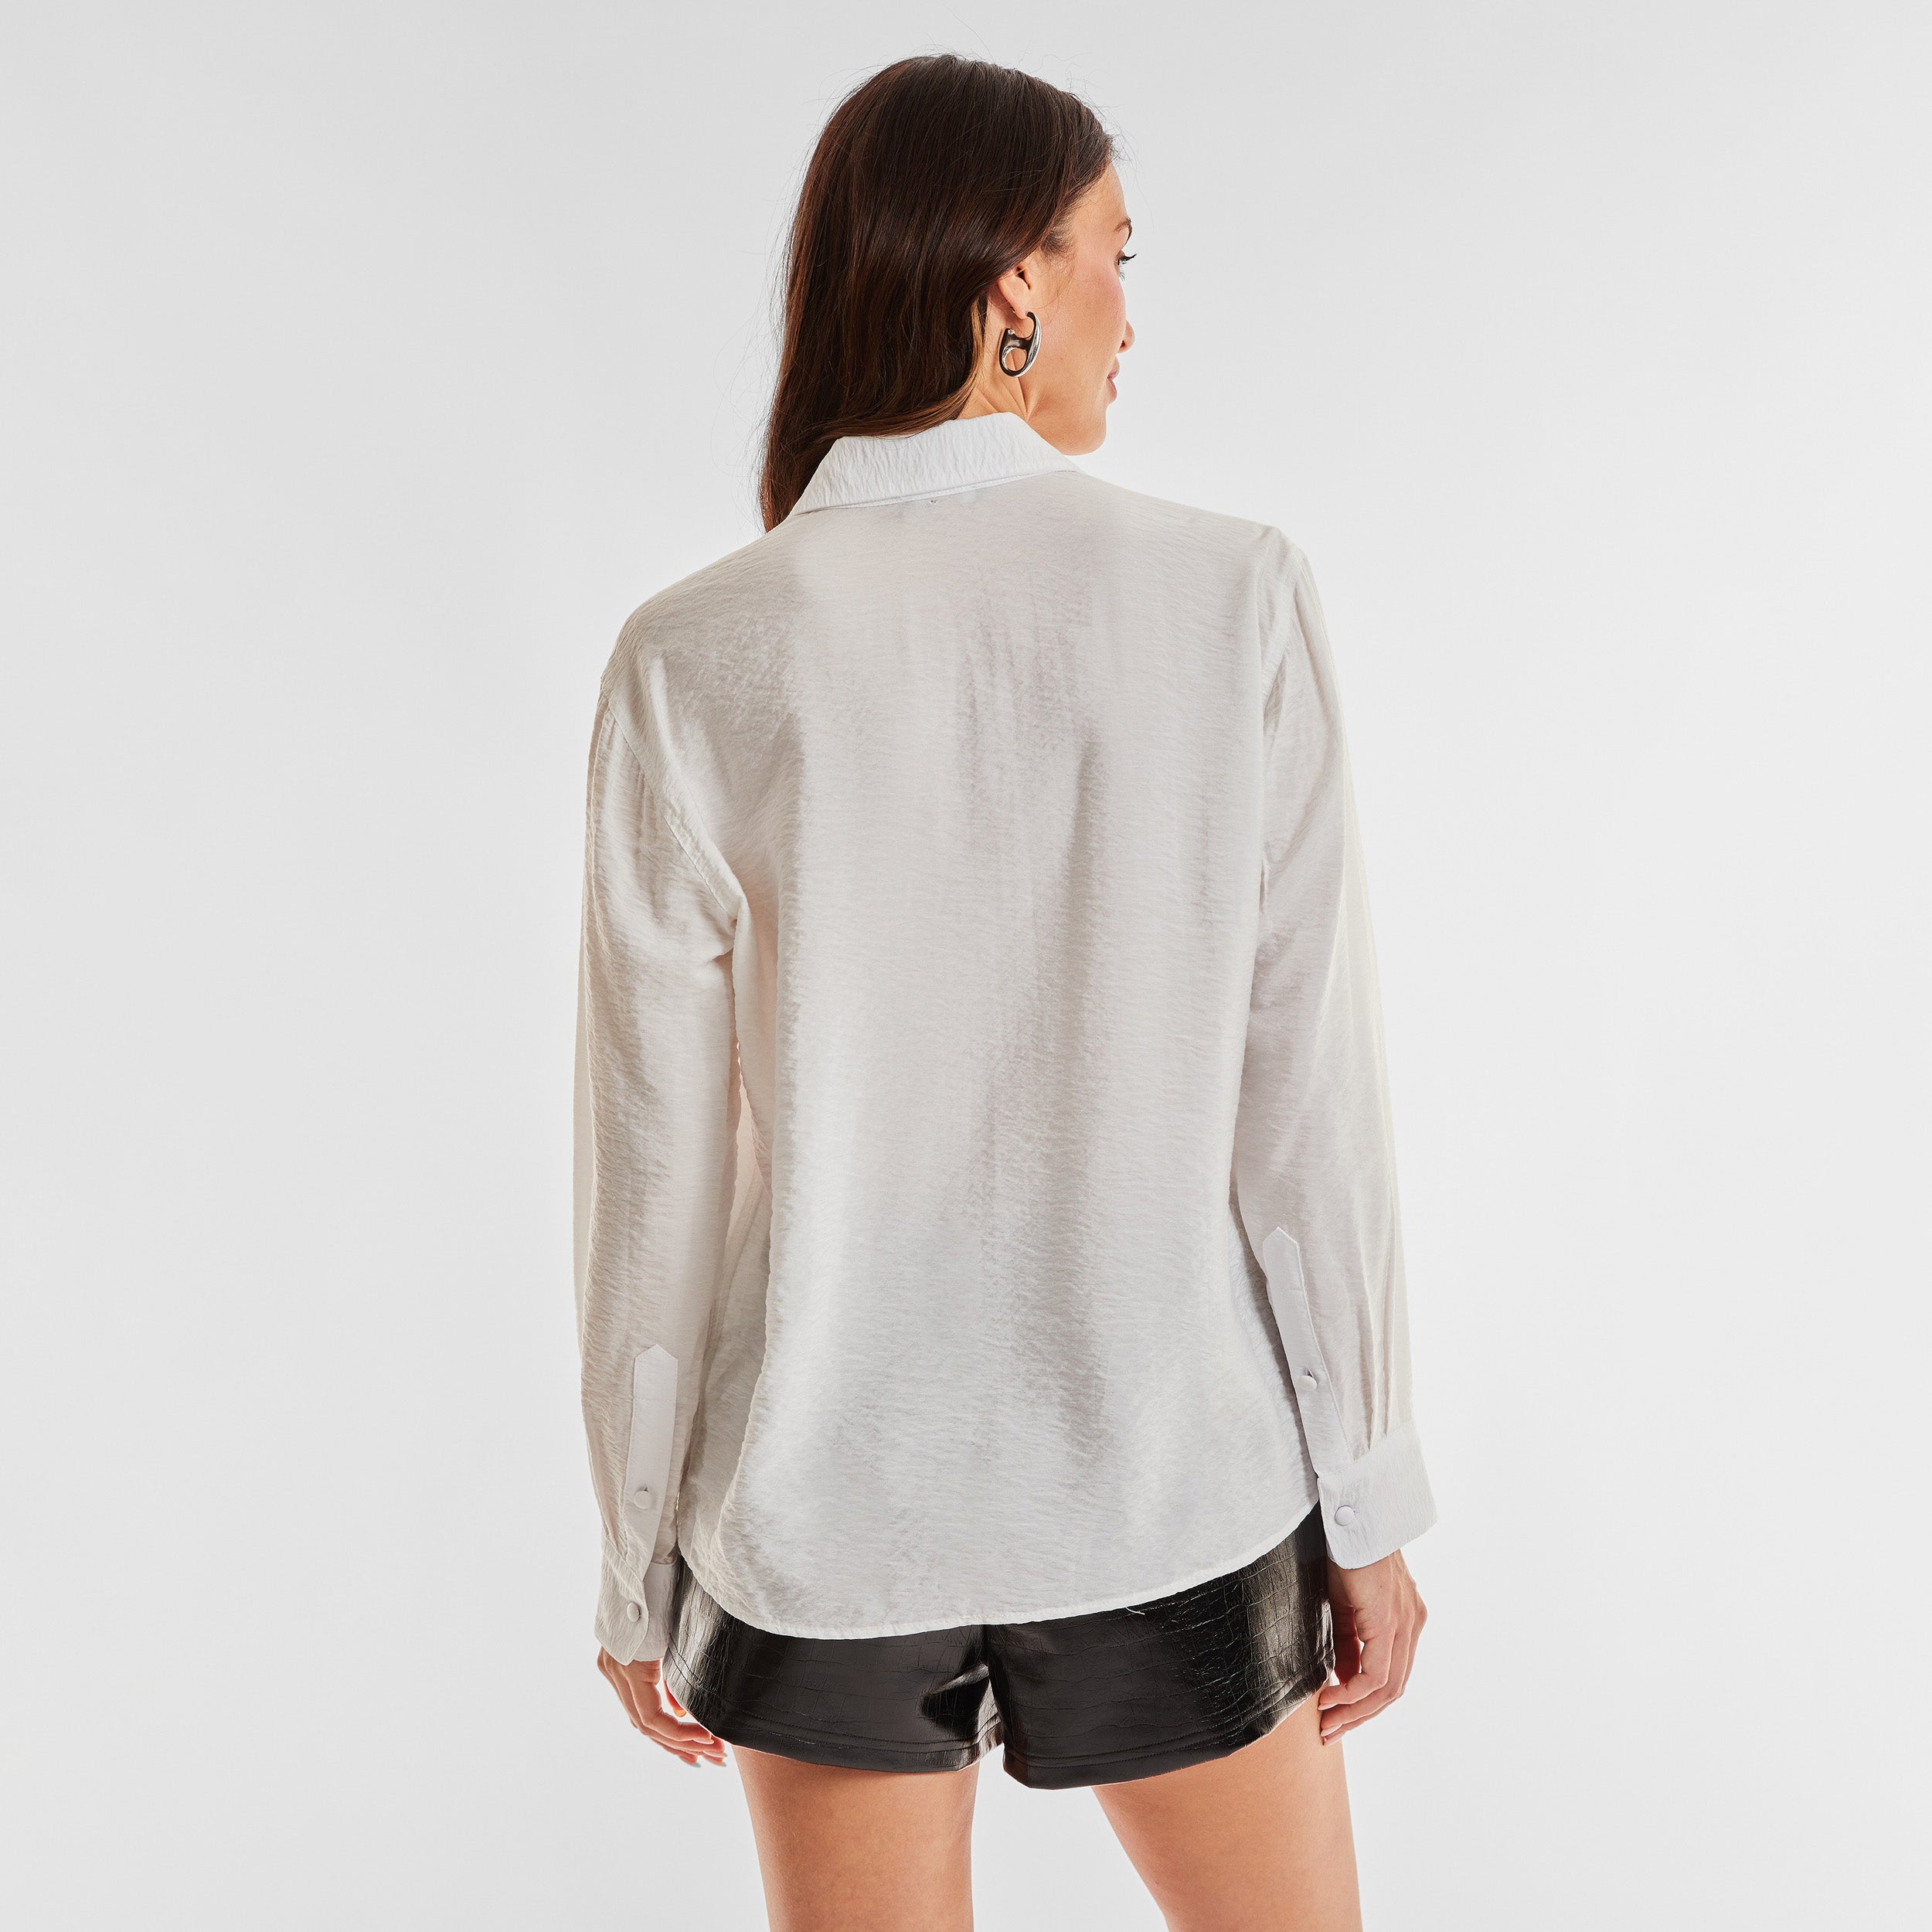 Rear view of woman wearing sheer and textured long sleeve button up top.